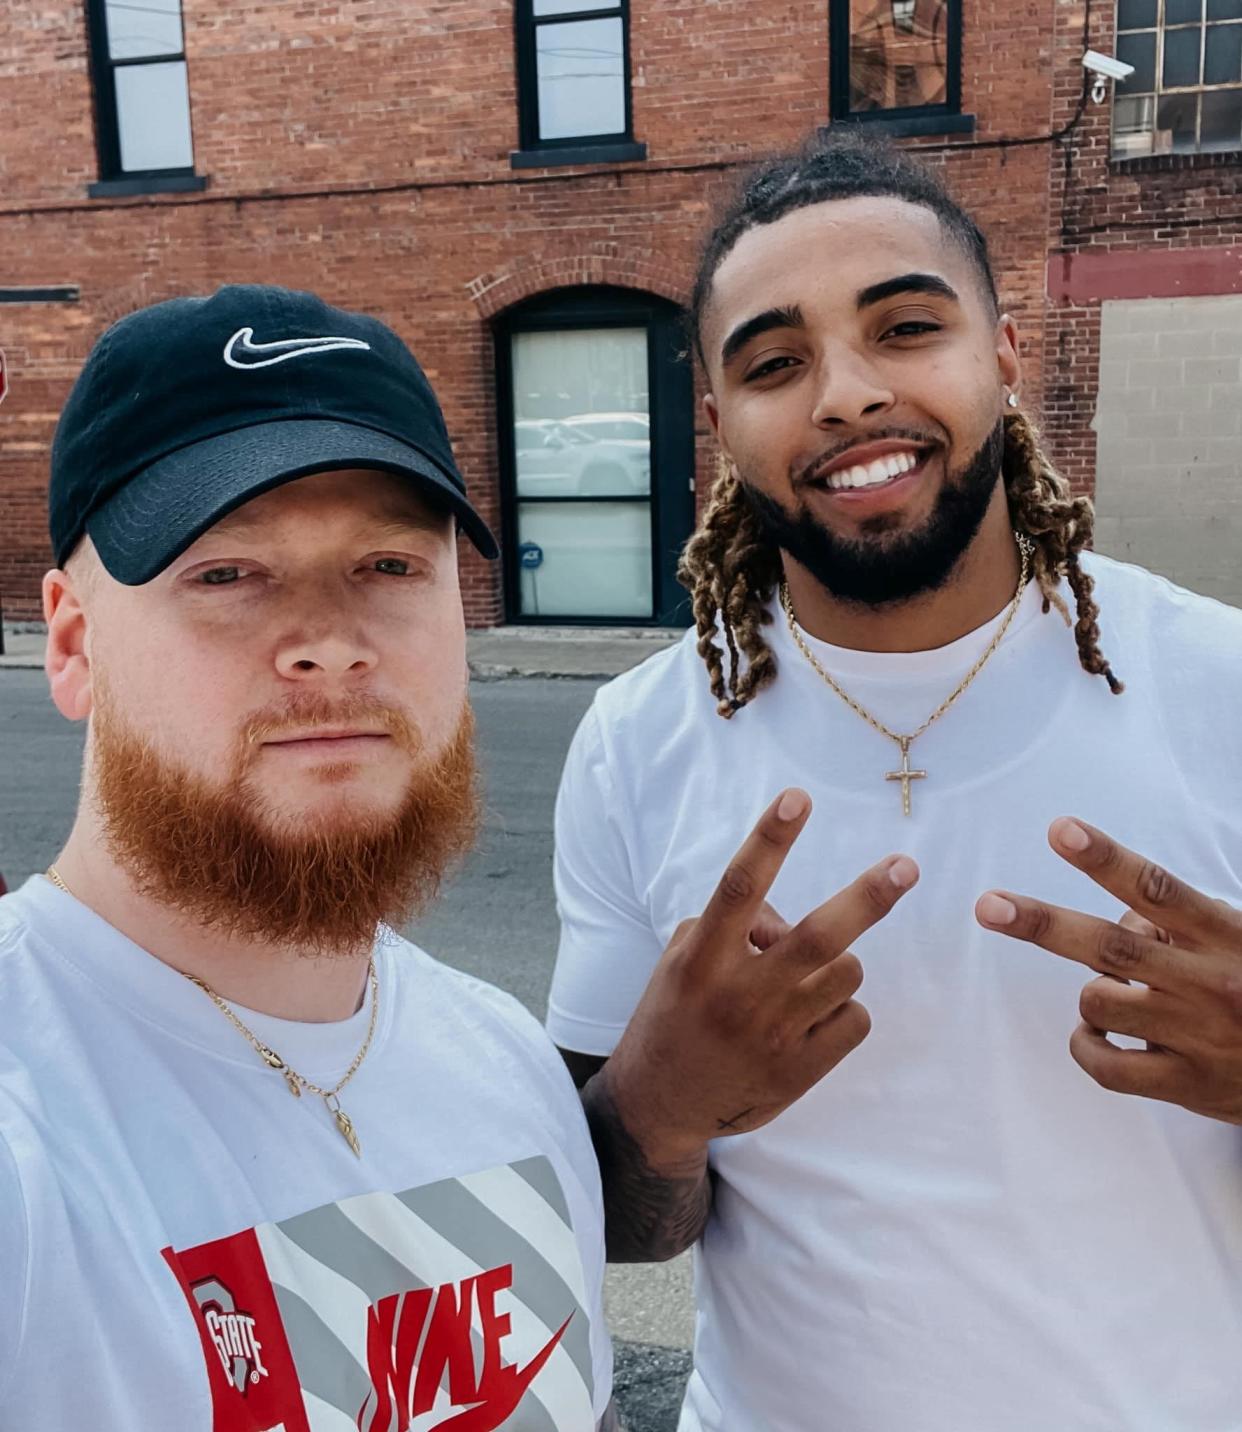 Marion resident Trey Crampton, left, is now the official videographer for Ohio State football player Gee Scott Jr., right. Crampton is working with Scott to provide video content for the Buckeye tight end's social media accounts and NIL interests. Crampton owns and operates Trey Films Media LLC.